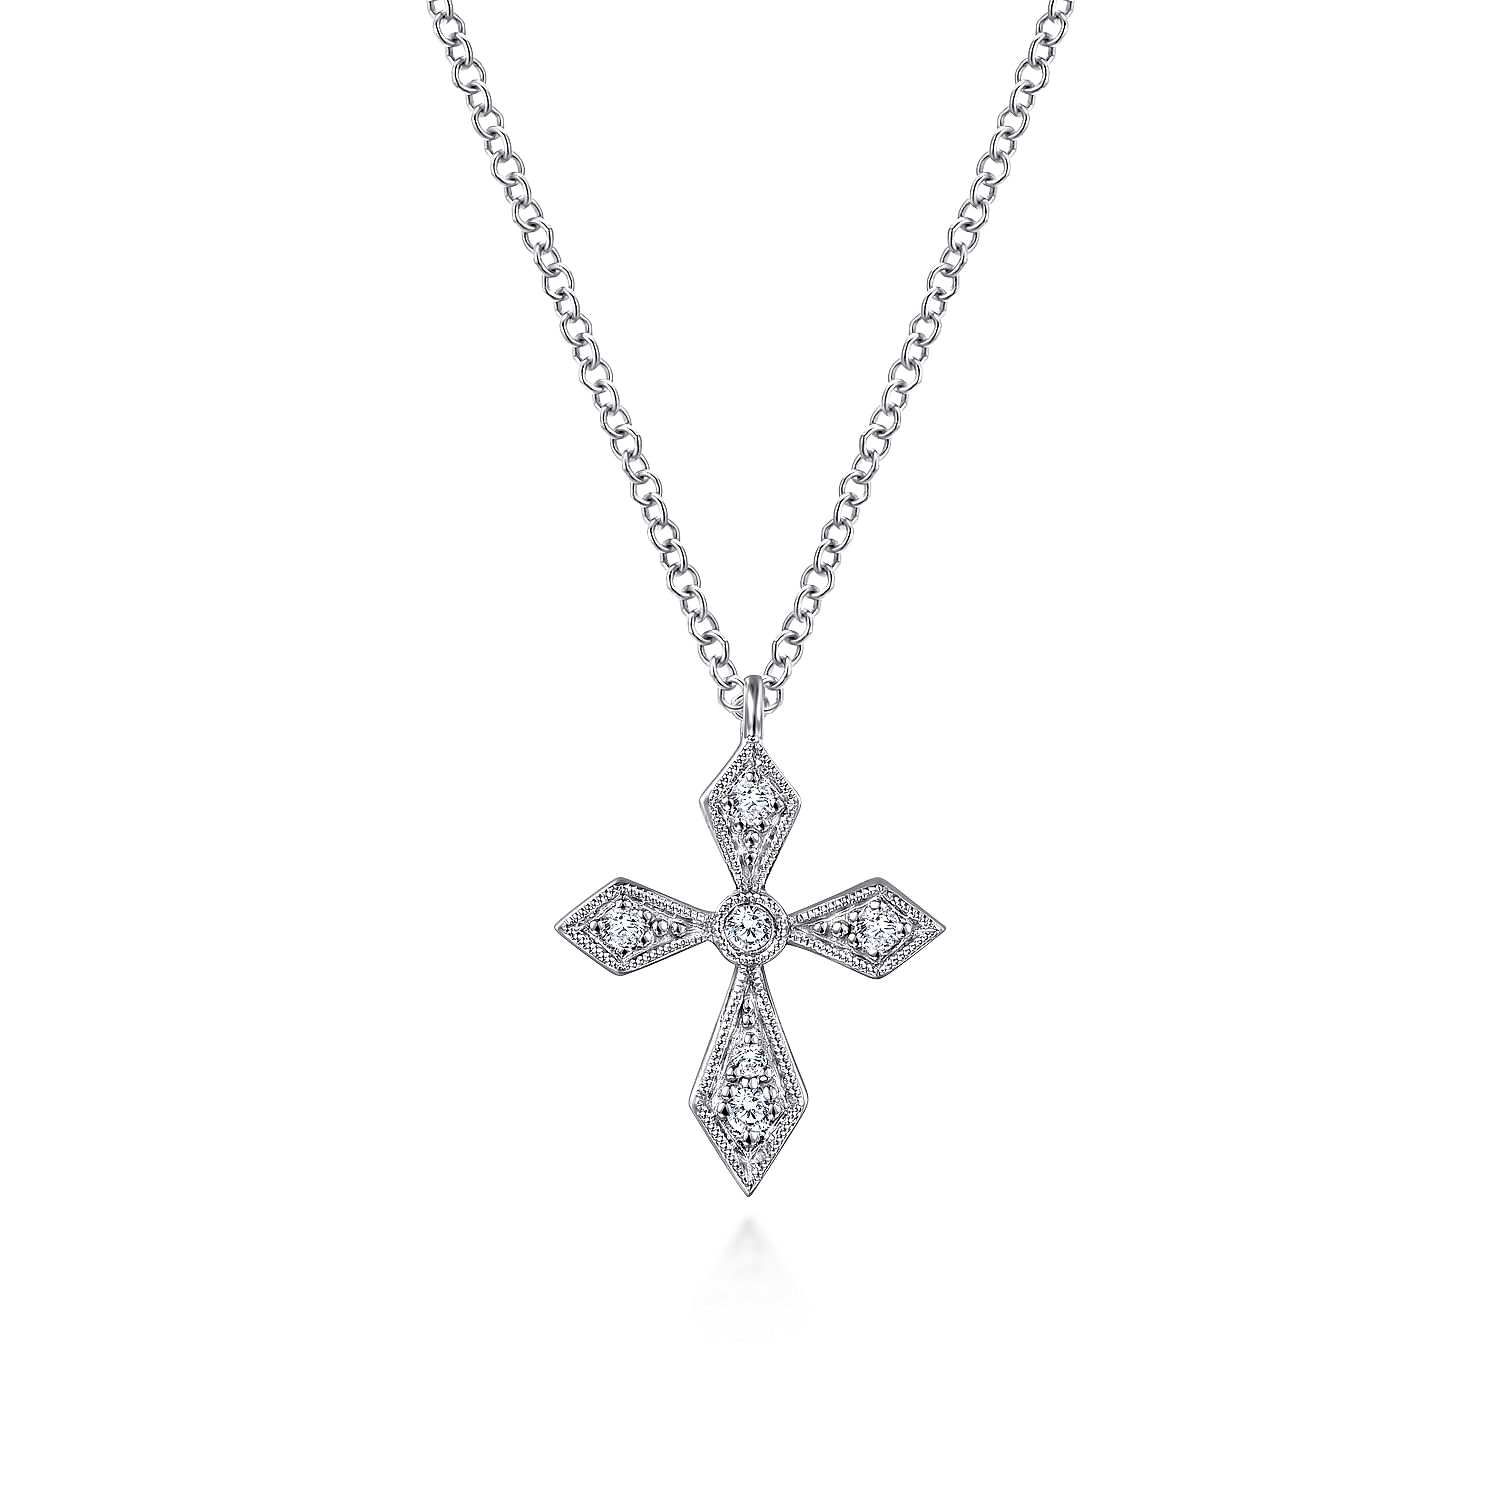 Vintage Inspired 14K White Gold Pointed Diamond Cross Pendant Necklace